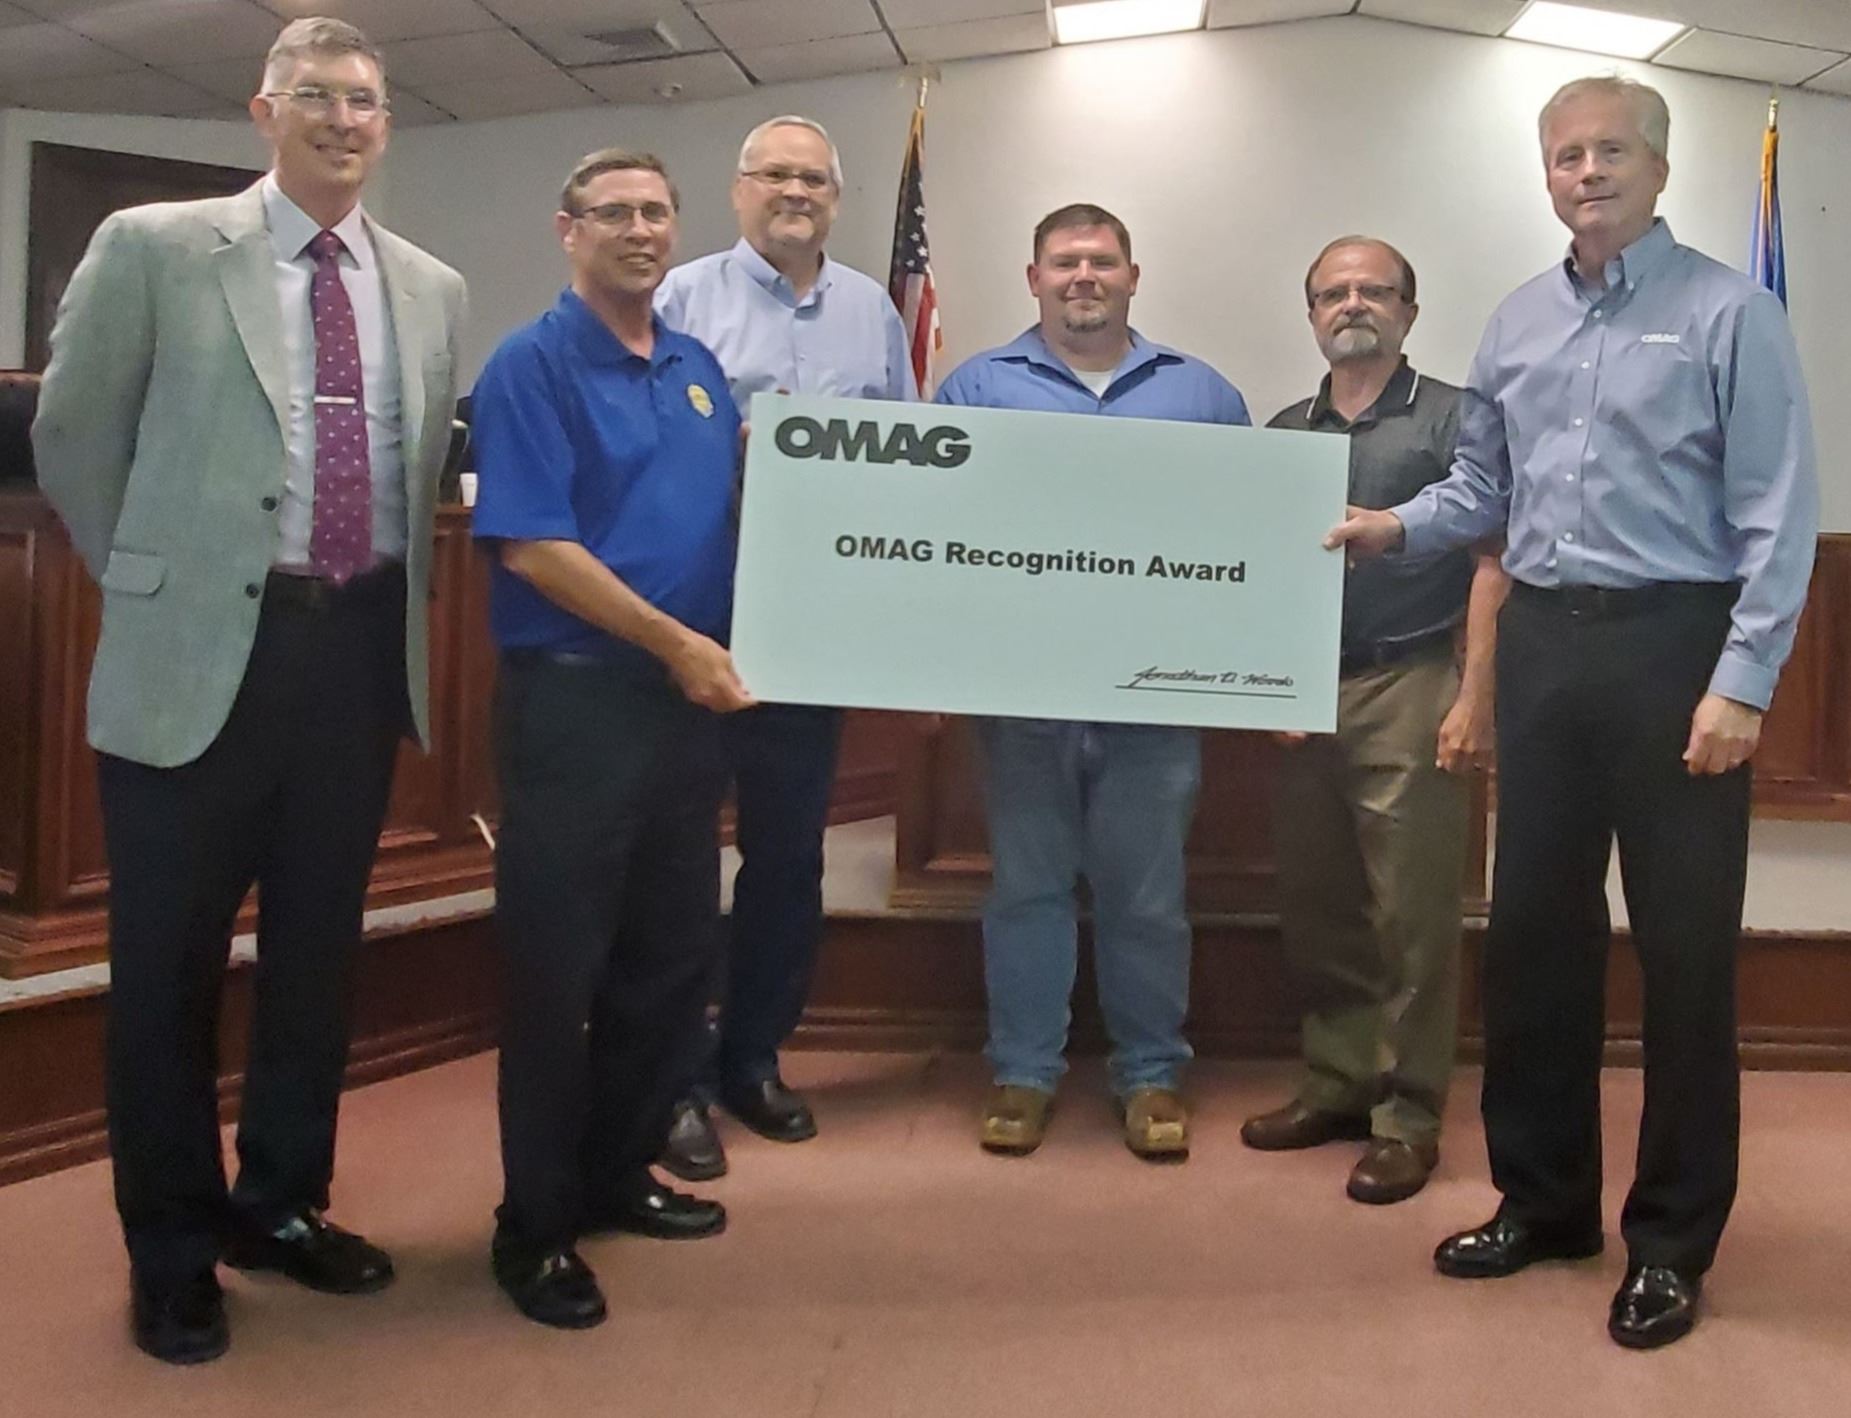 At the June 4, 2019 regular City Council meeting, the City was awarded a check in the amount of $6,000 as a member of the OMAG Recognition Program. The OMAG Recognition Program seeks to strengthen municipal governance and reduce claims through education and self-assessment. OMAG believes the best-run cities and towns have fewer claims, and the claims they do incur cost less to resolve. Choctaw Elected Officials participated in OMAG prescribed training and completed a Stability Test for inclusion in the program. Congratulations and thank you!